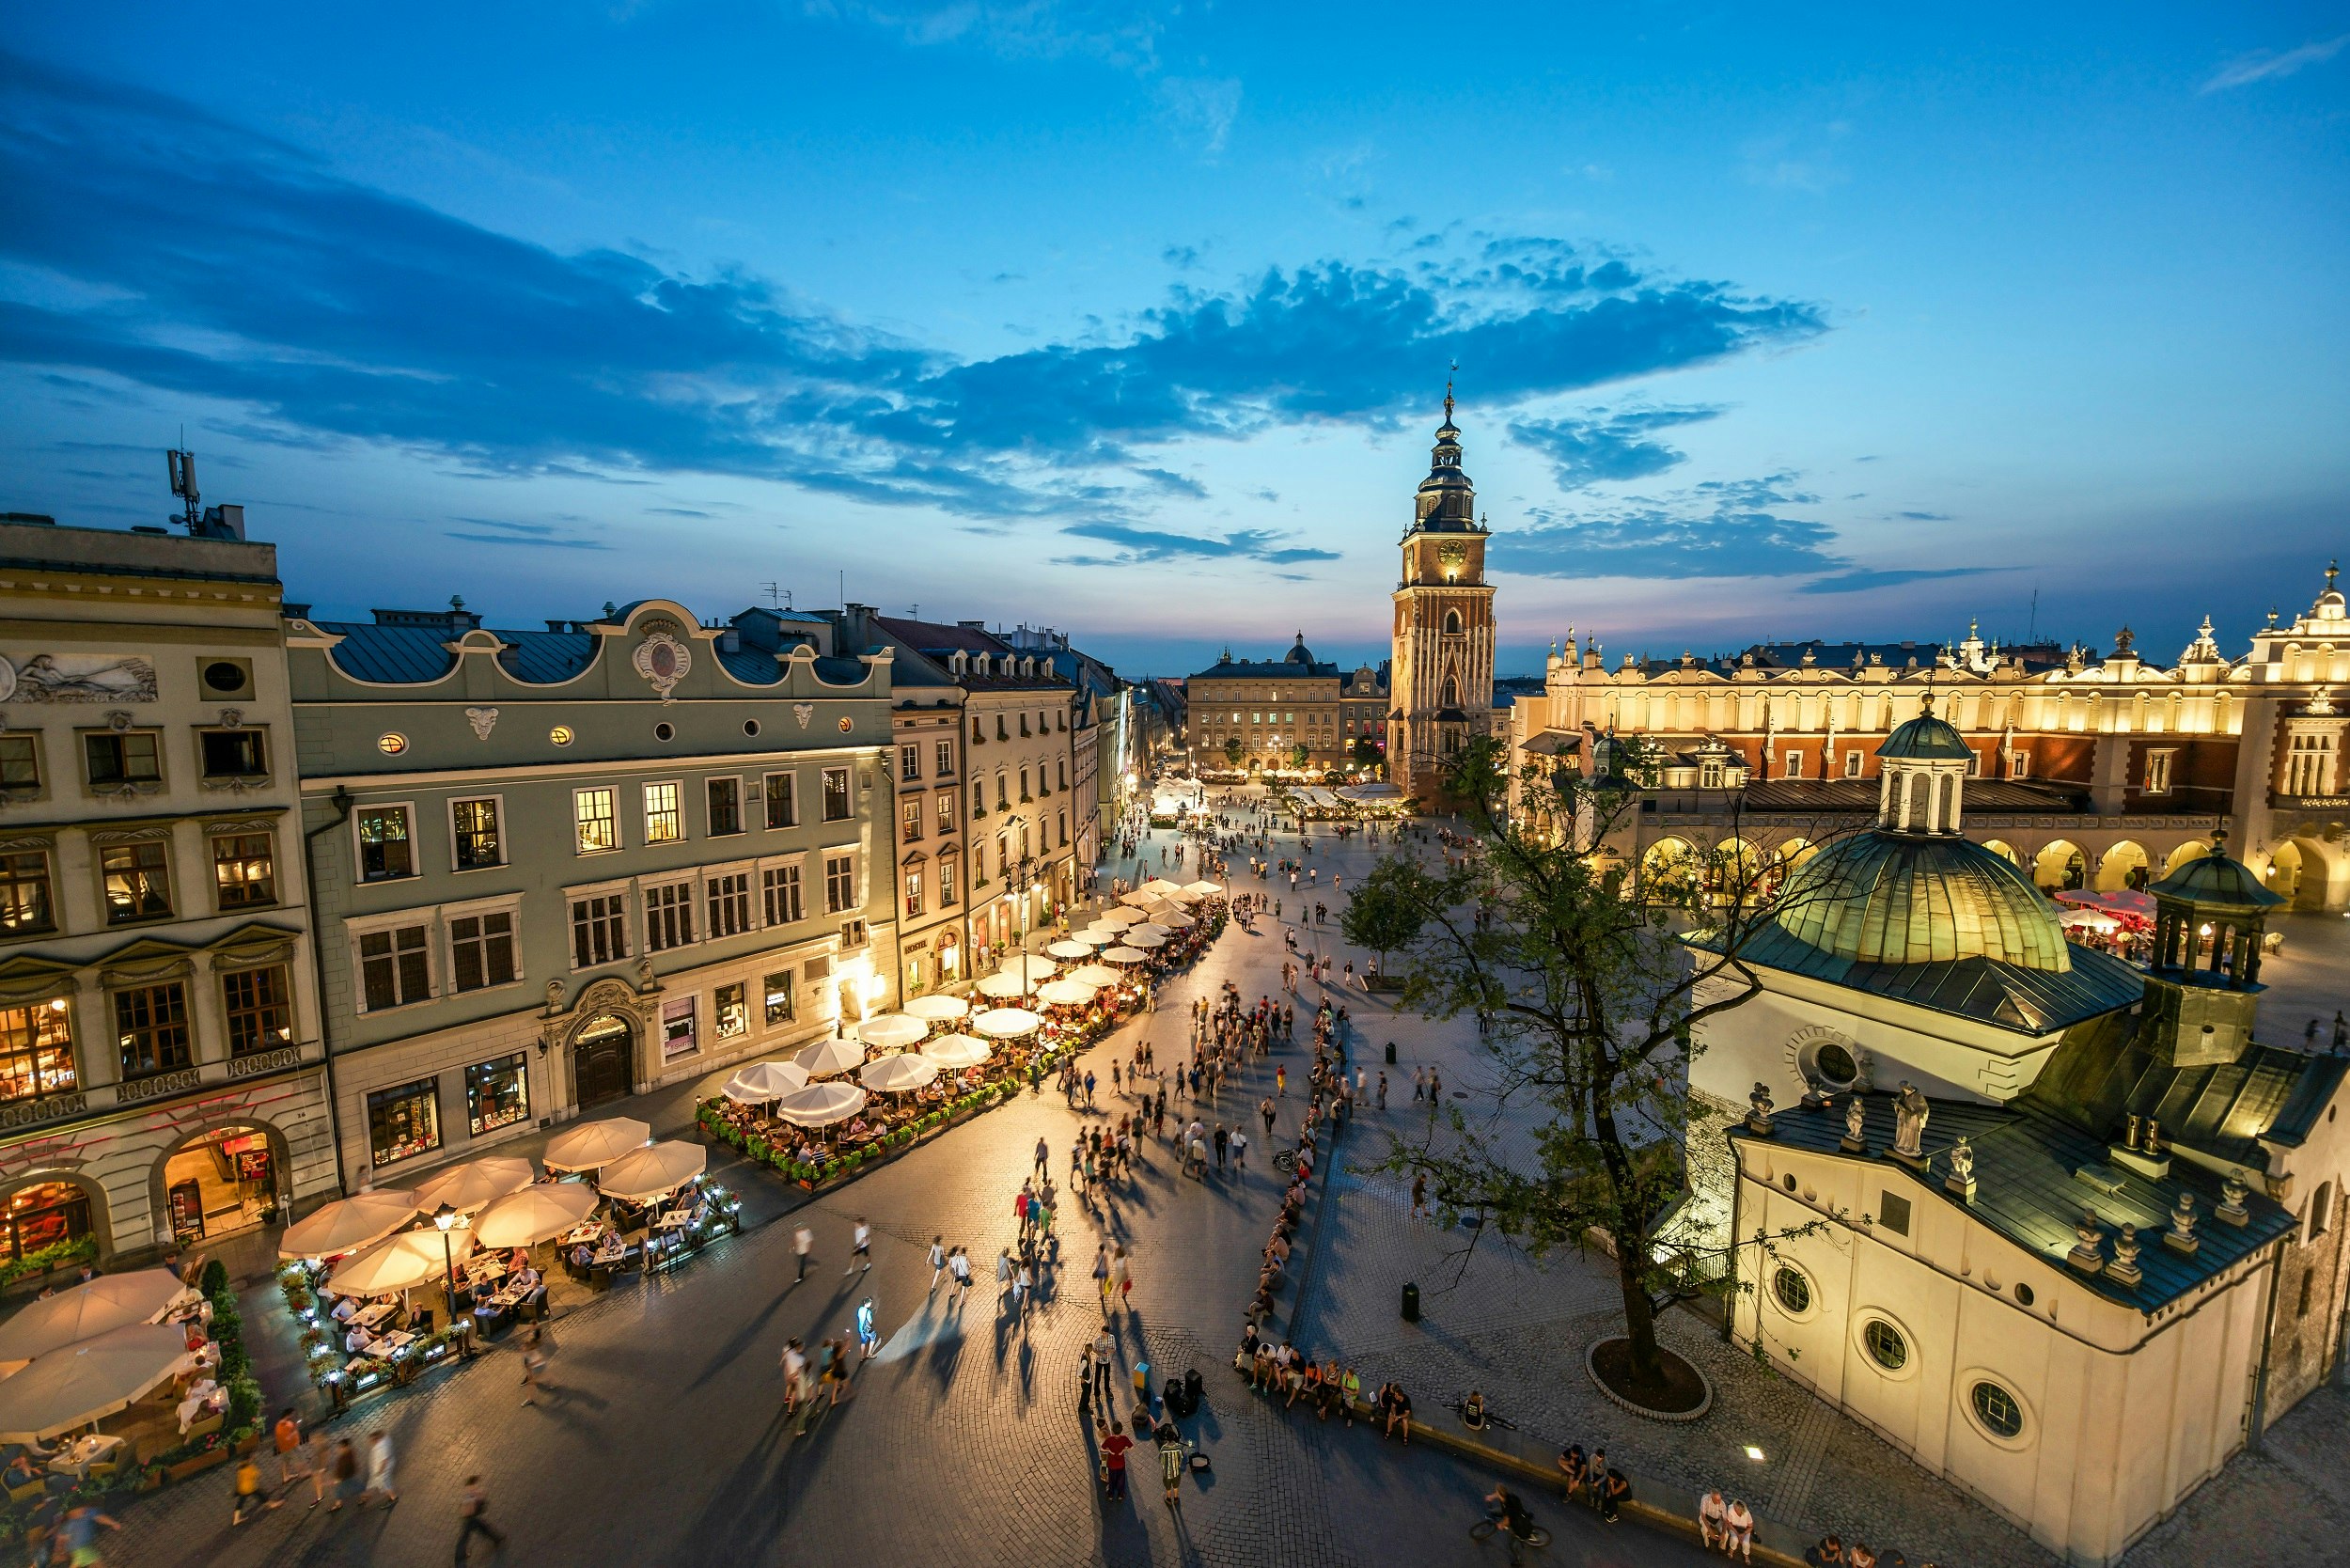 A view down over the square lined with grand buildings. The Town Hall Tower is the tallest of them all. Many outside tables at restaurants are occupied as the last light from the sun fades in the sky